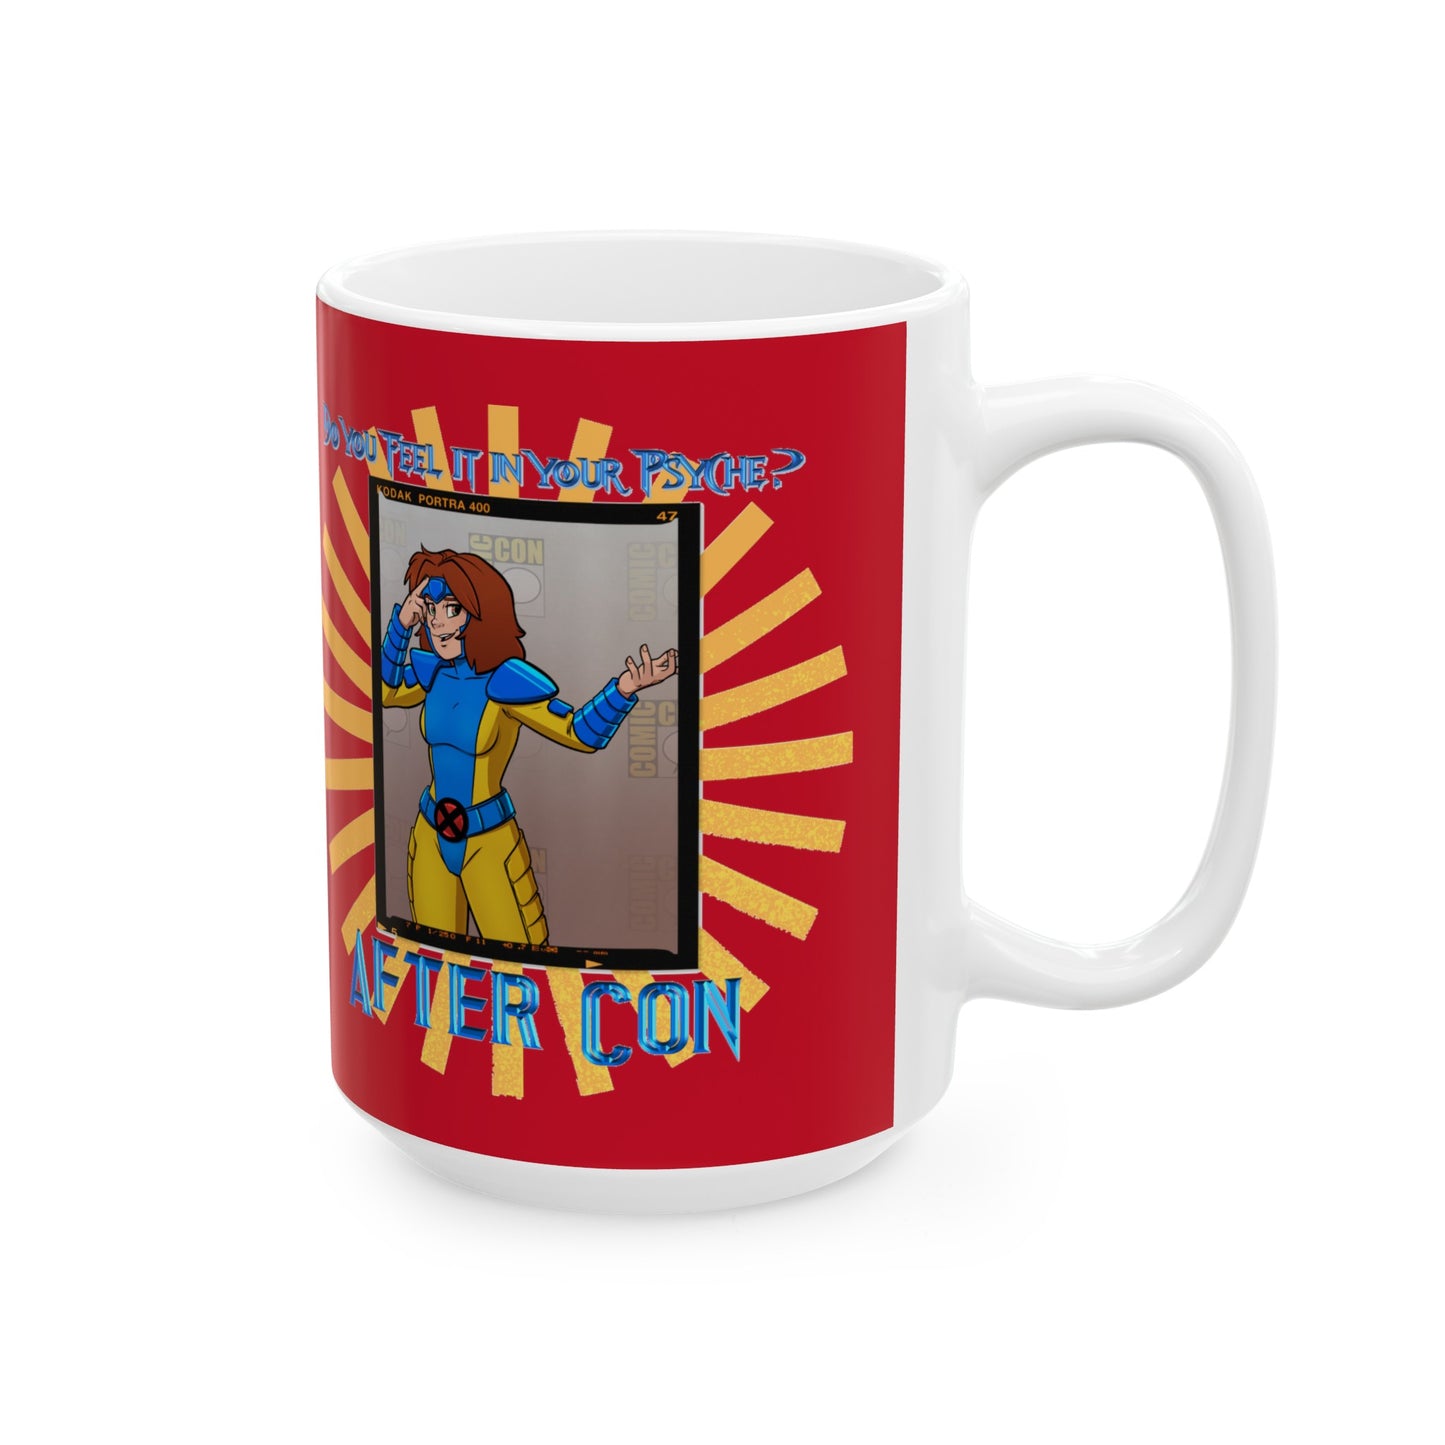 After-Con "Feel it in your Psyche" Ceramic Mug